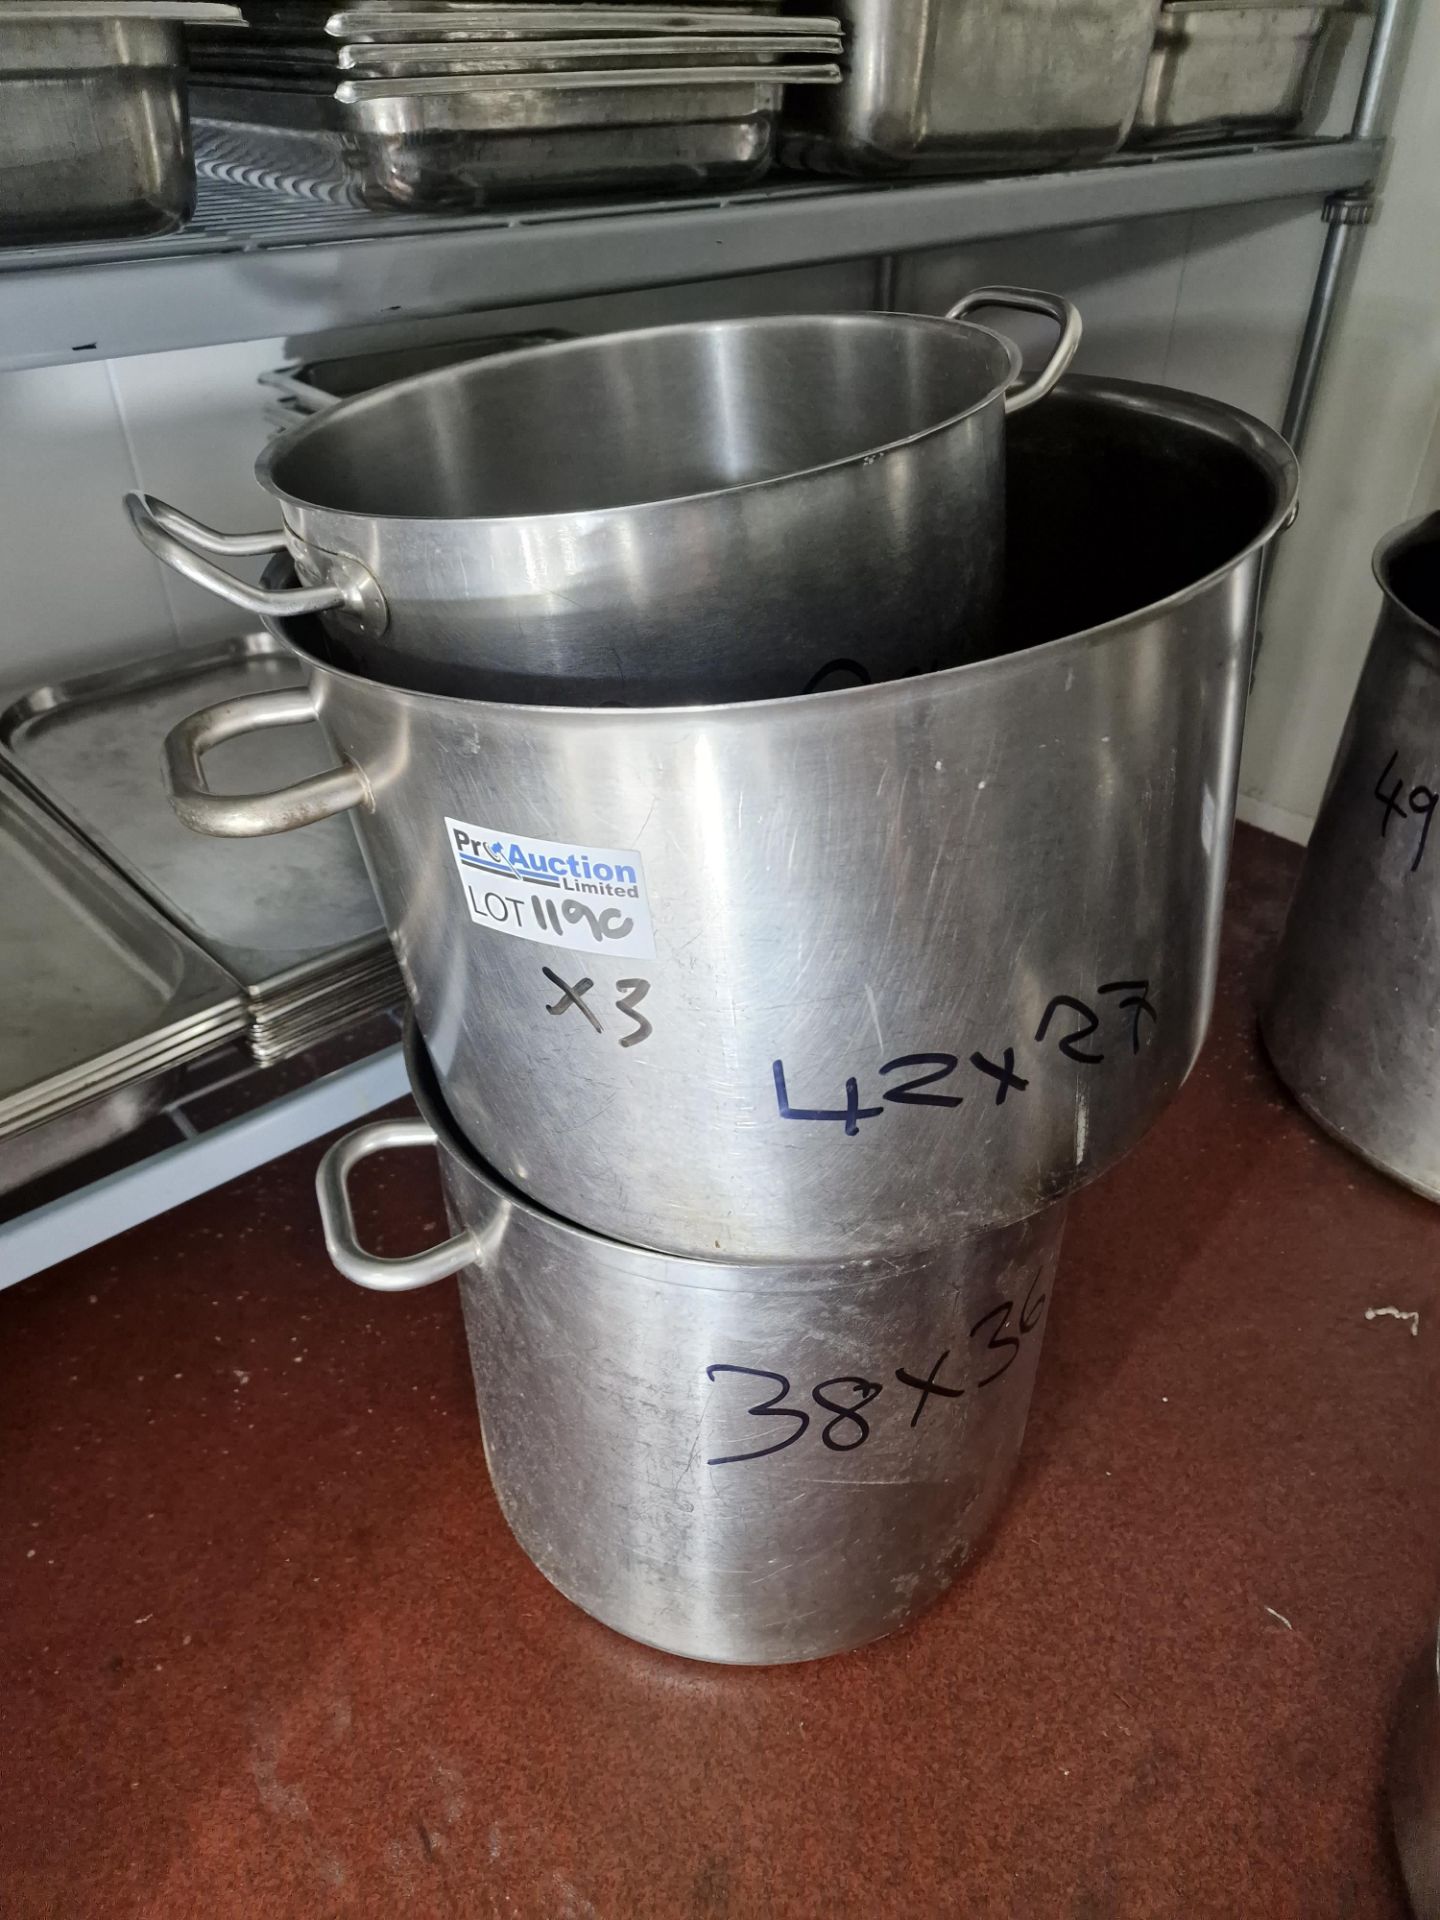 3 x Stainless Steel Heavy Duty Commercial Stock Pots 38 X36cm 42 x 23cm And 32 x 28cm